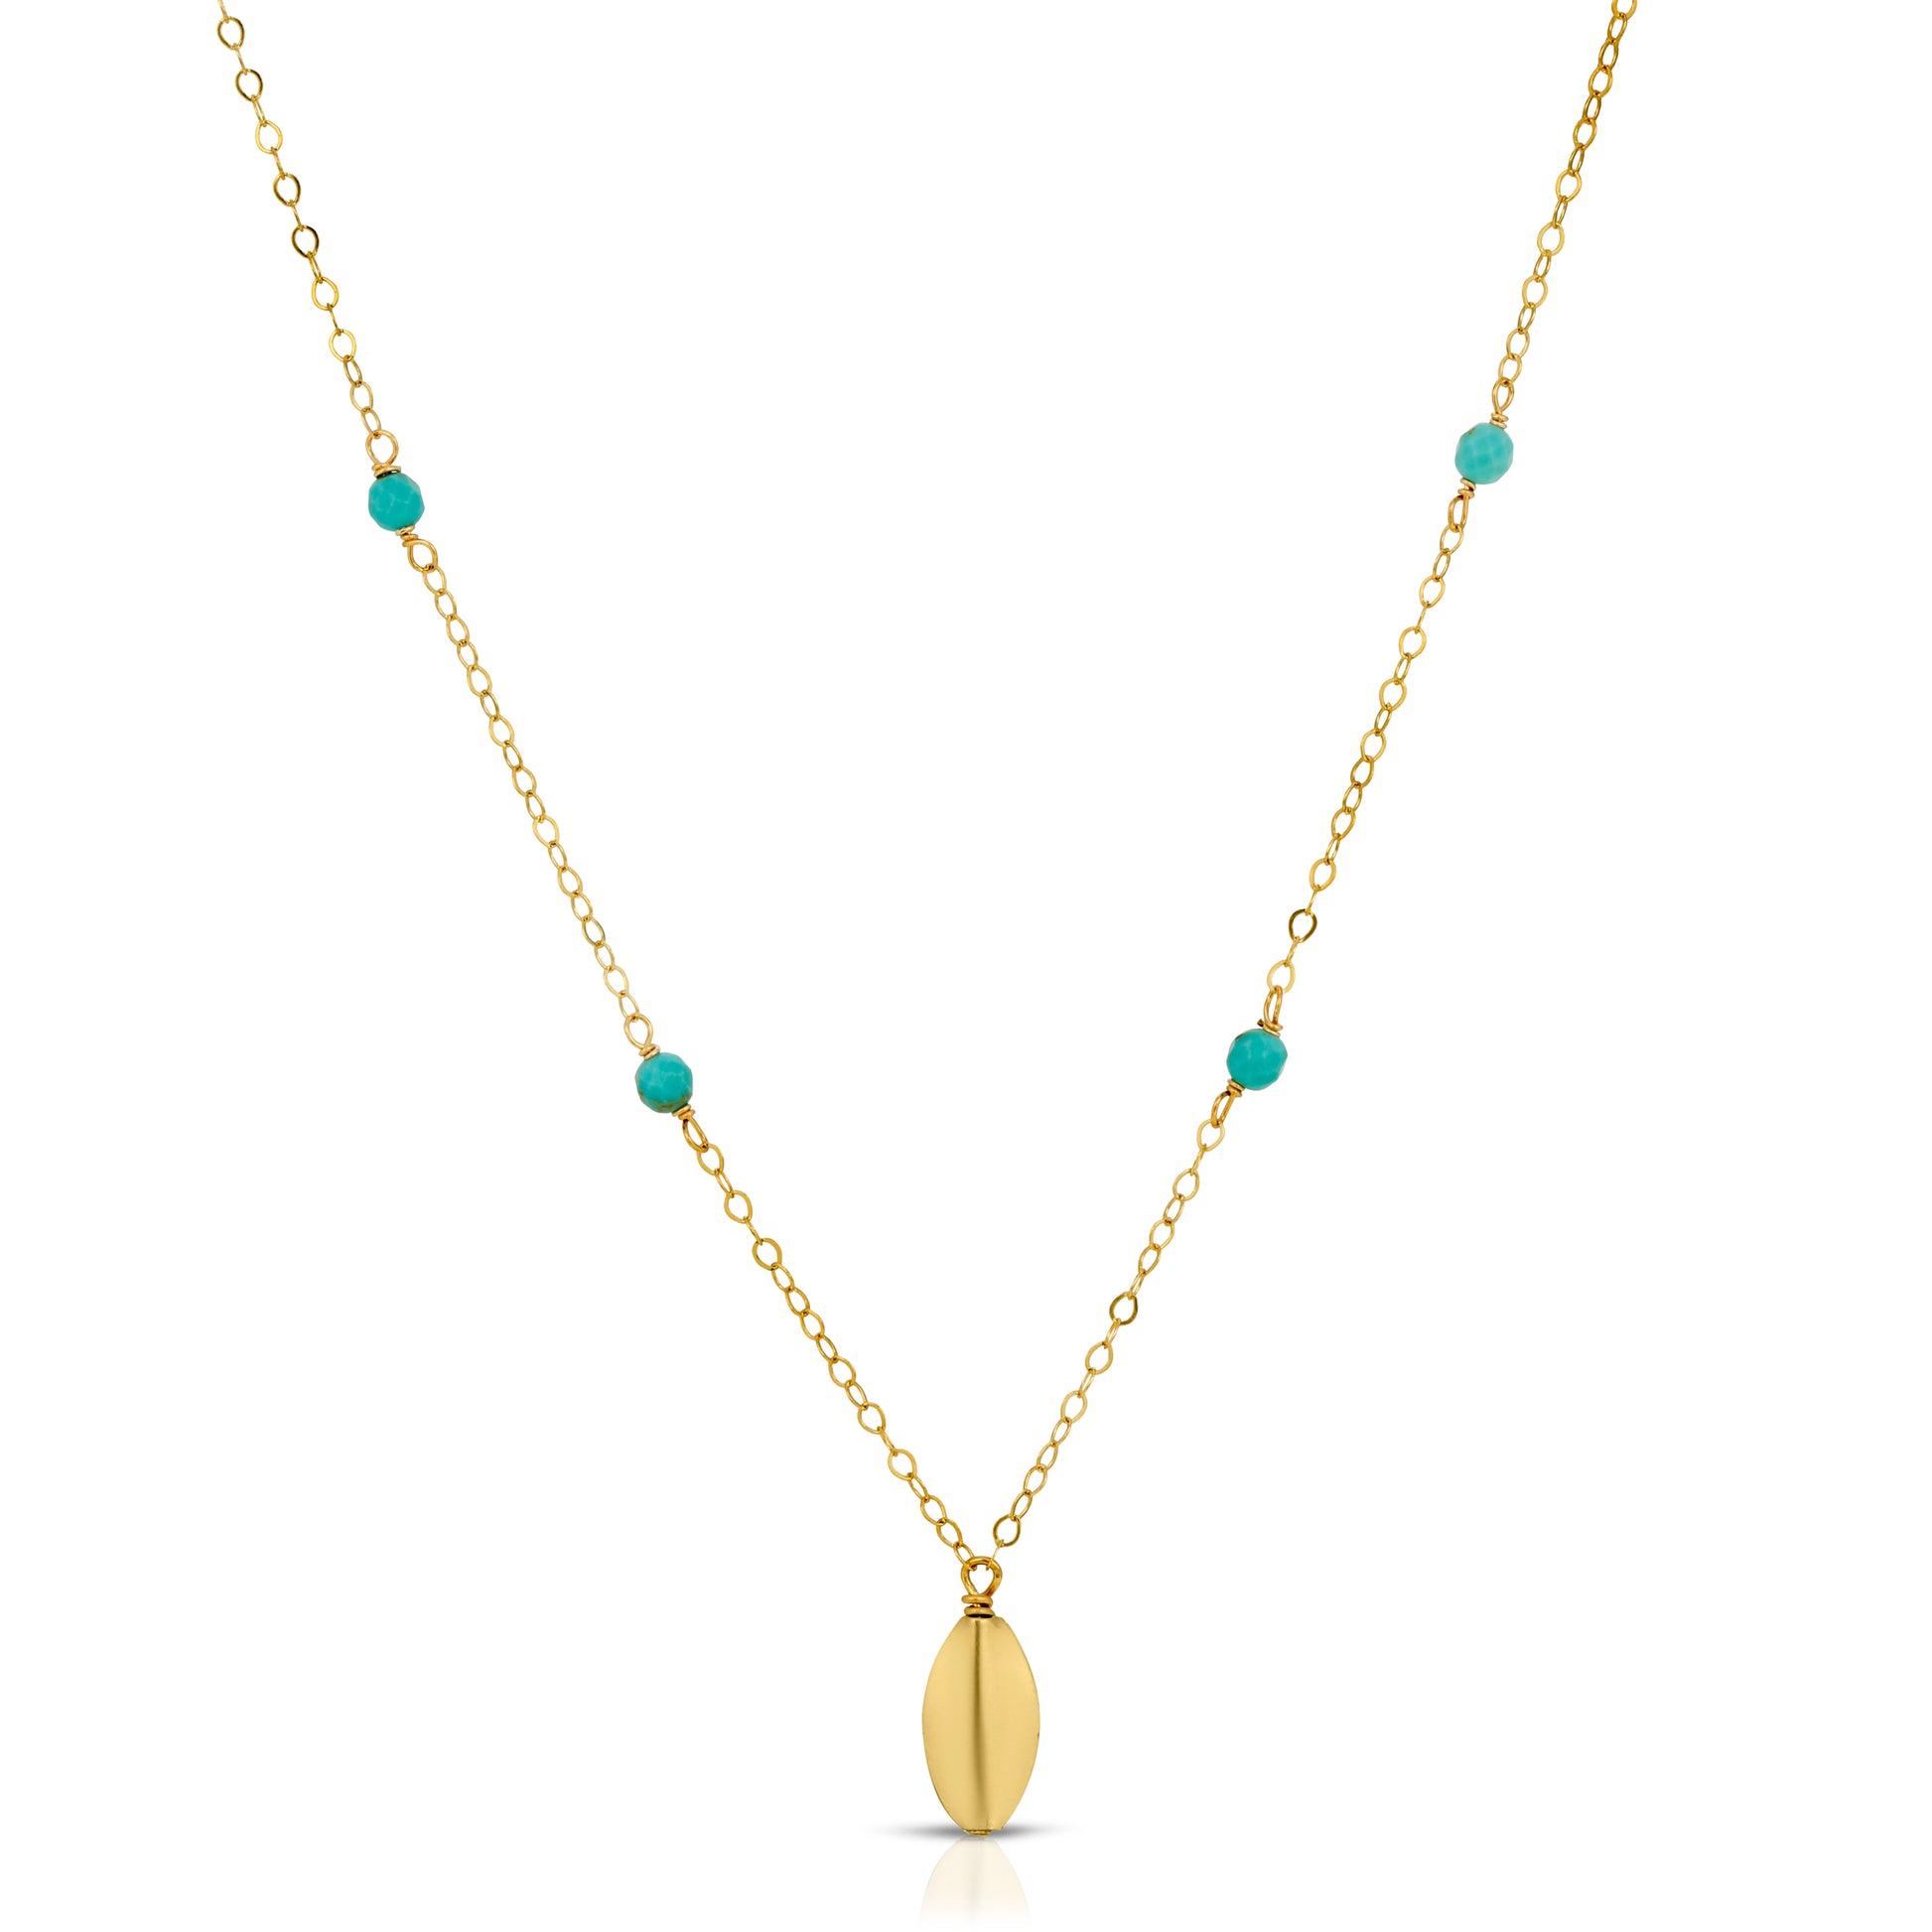 18K GOLD LEAF AND TURQUOISE NECKLACE - Danielle Morgan 